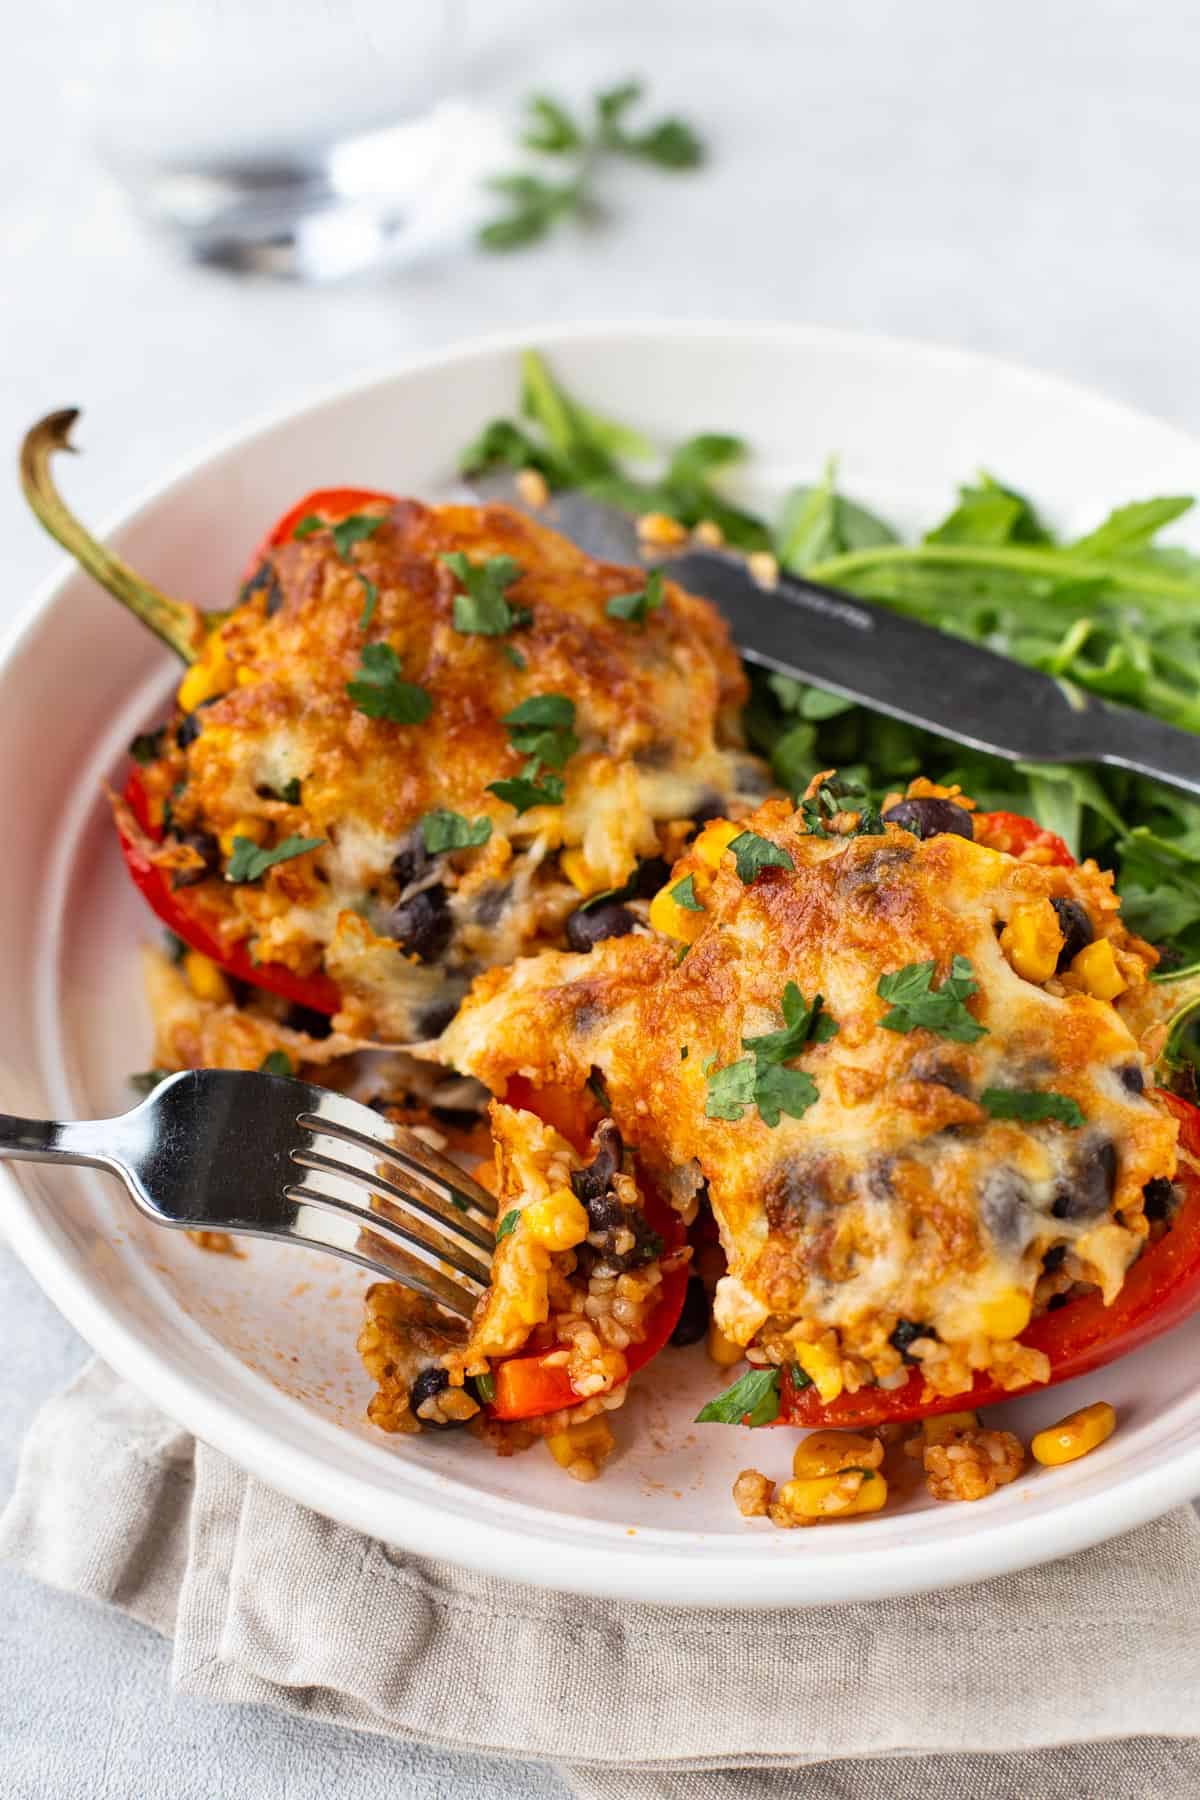 A fork cutting into a vegetarian stuffed pepper with crispy cheese topping.